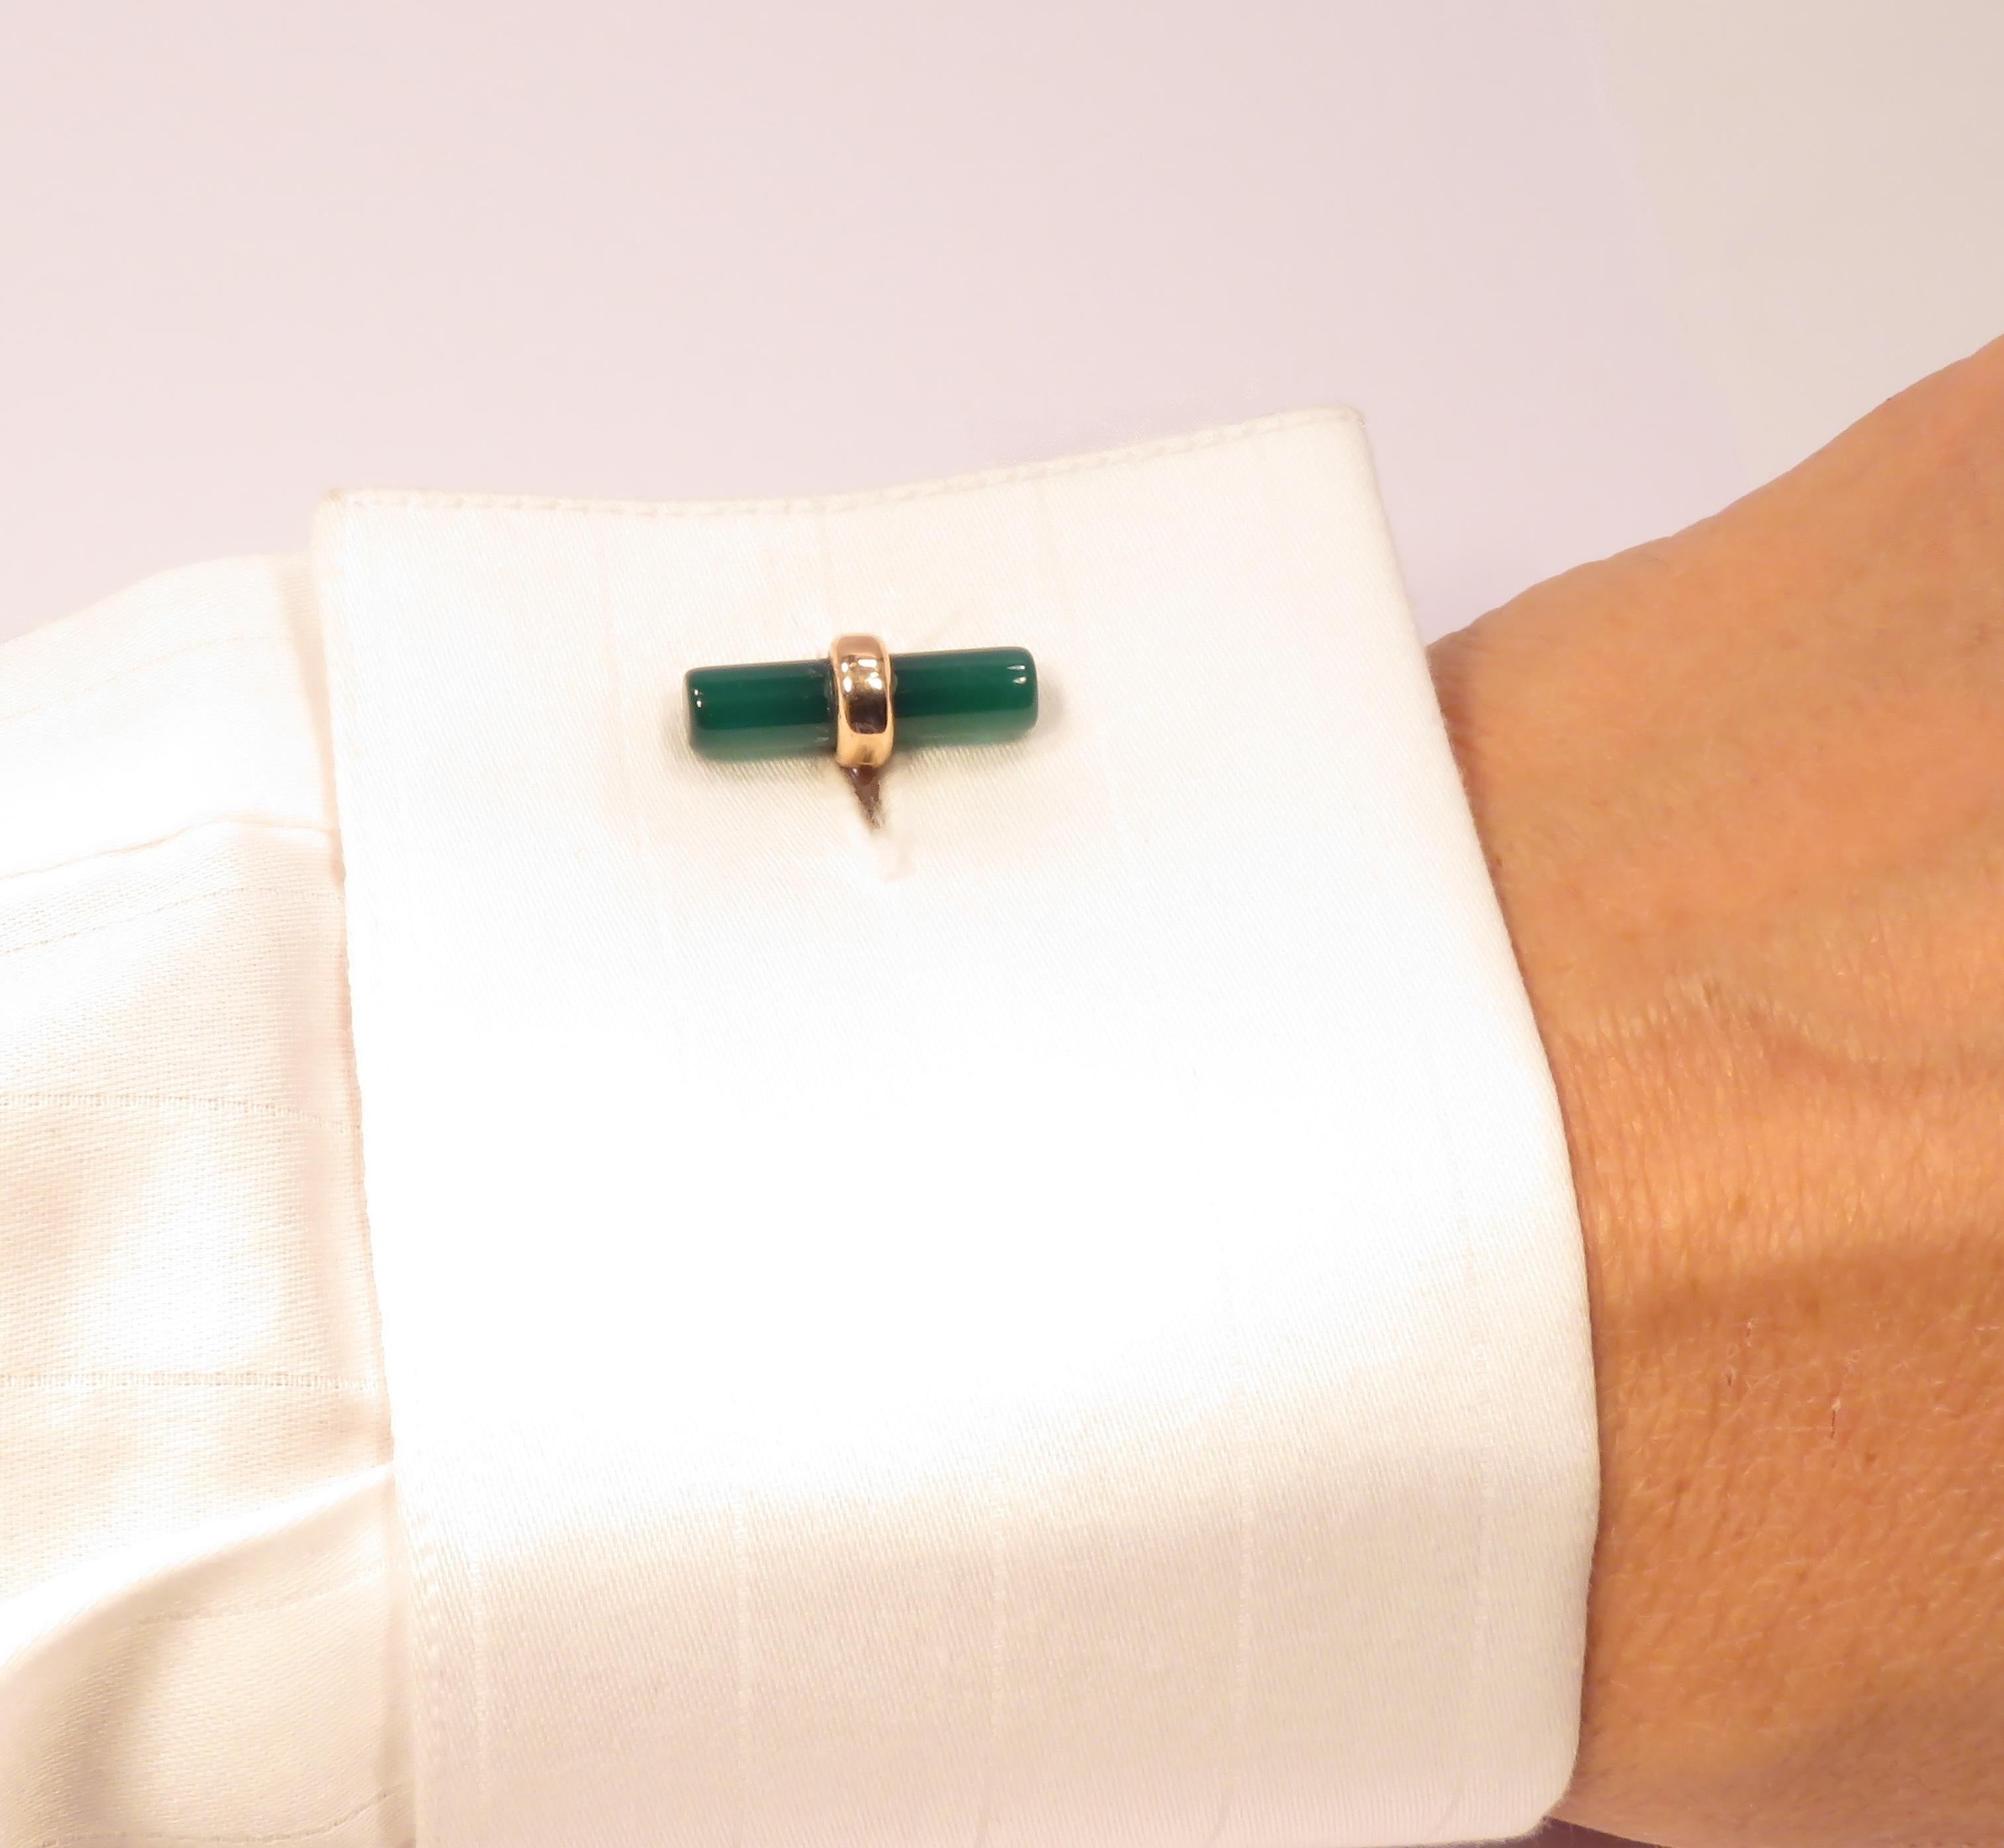 Handmade cufflinks in 9k rose gold featuring four natural green agate bars. Gemstones size: length 20 mm - diameter 5 mm / length 0,787 inches - diameter 0,196 inches. They are marked with the Italian Gold Mark 375 and Botta Gioielli brandmark